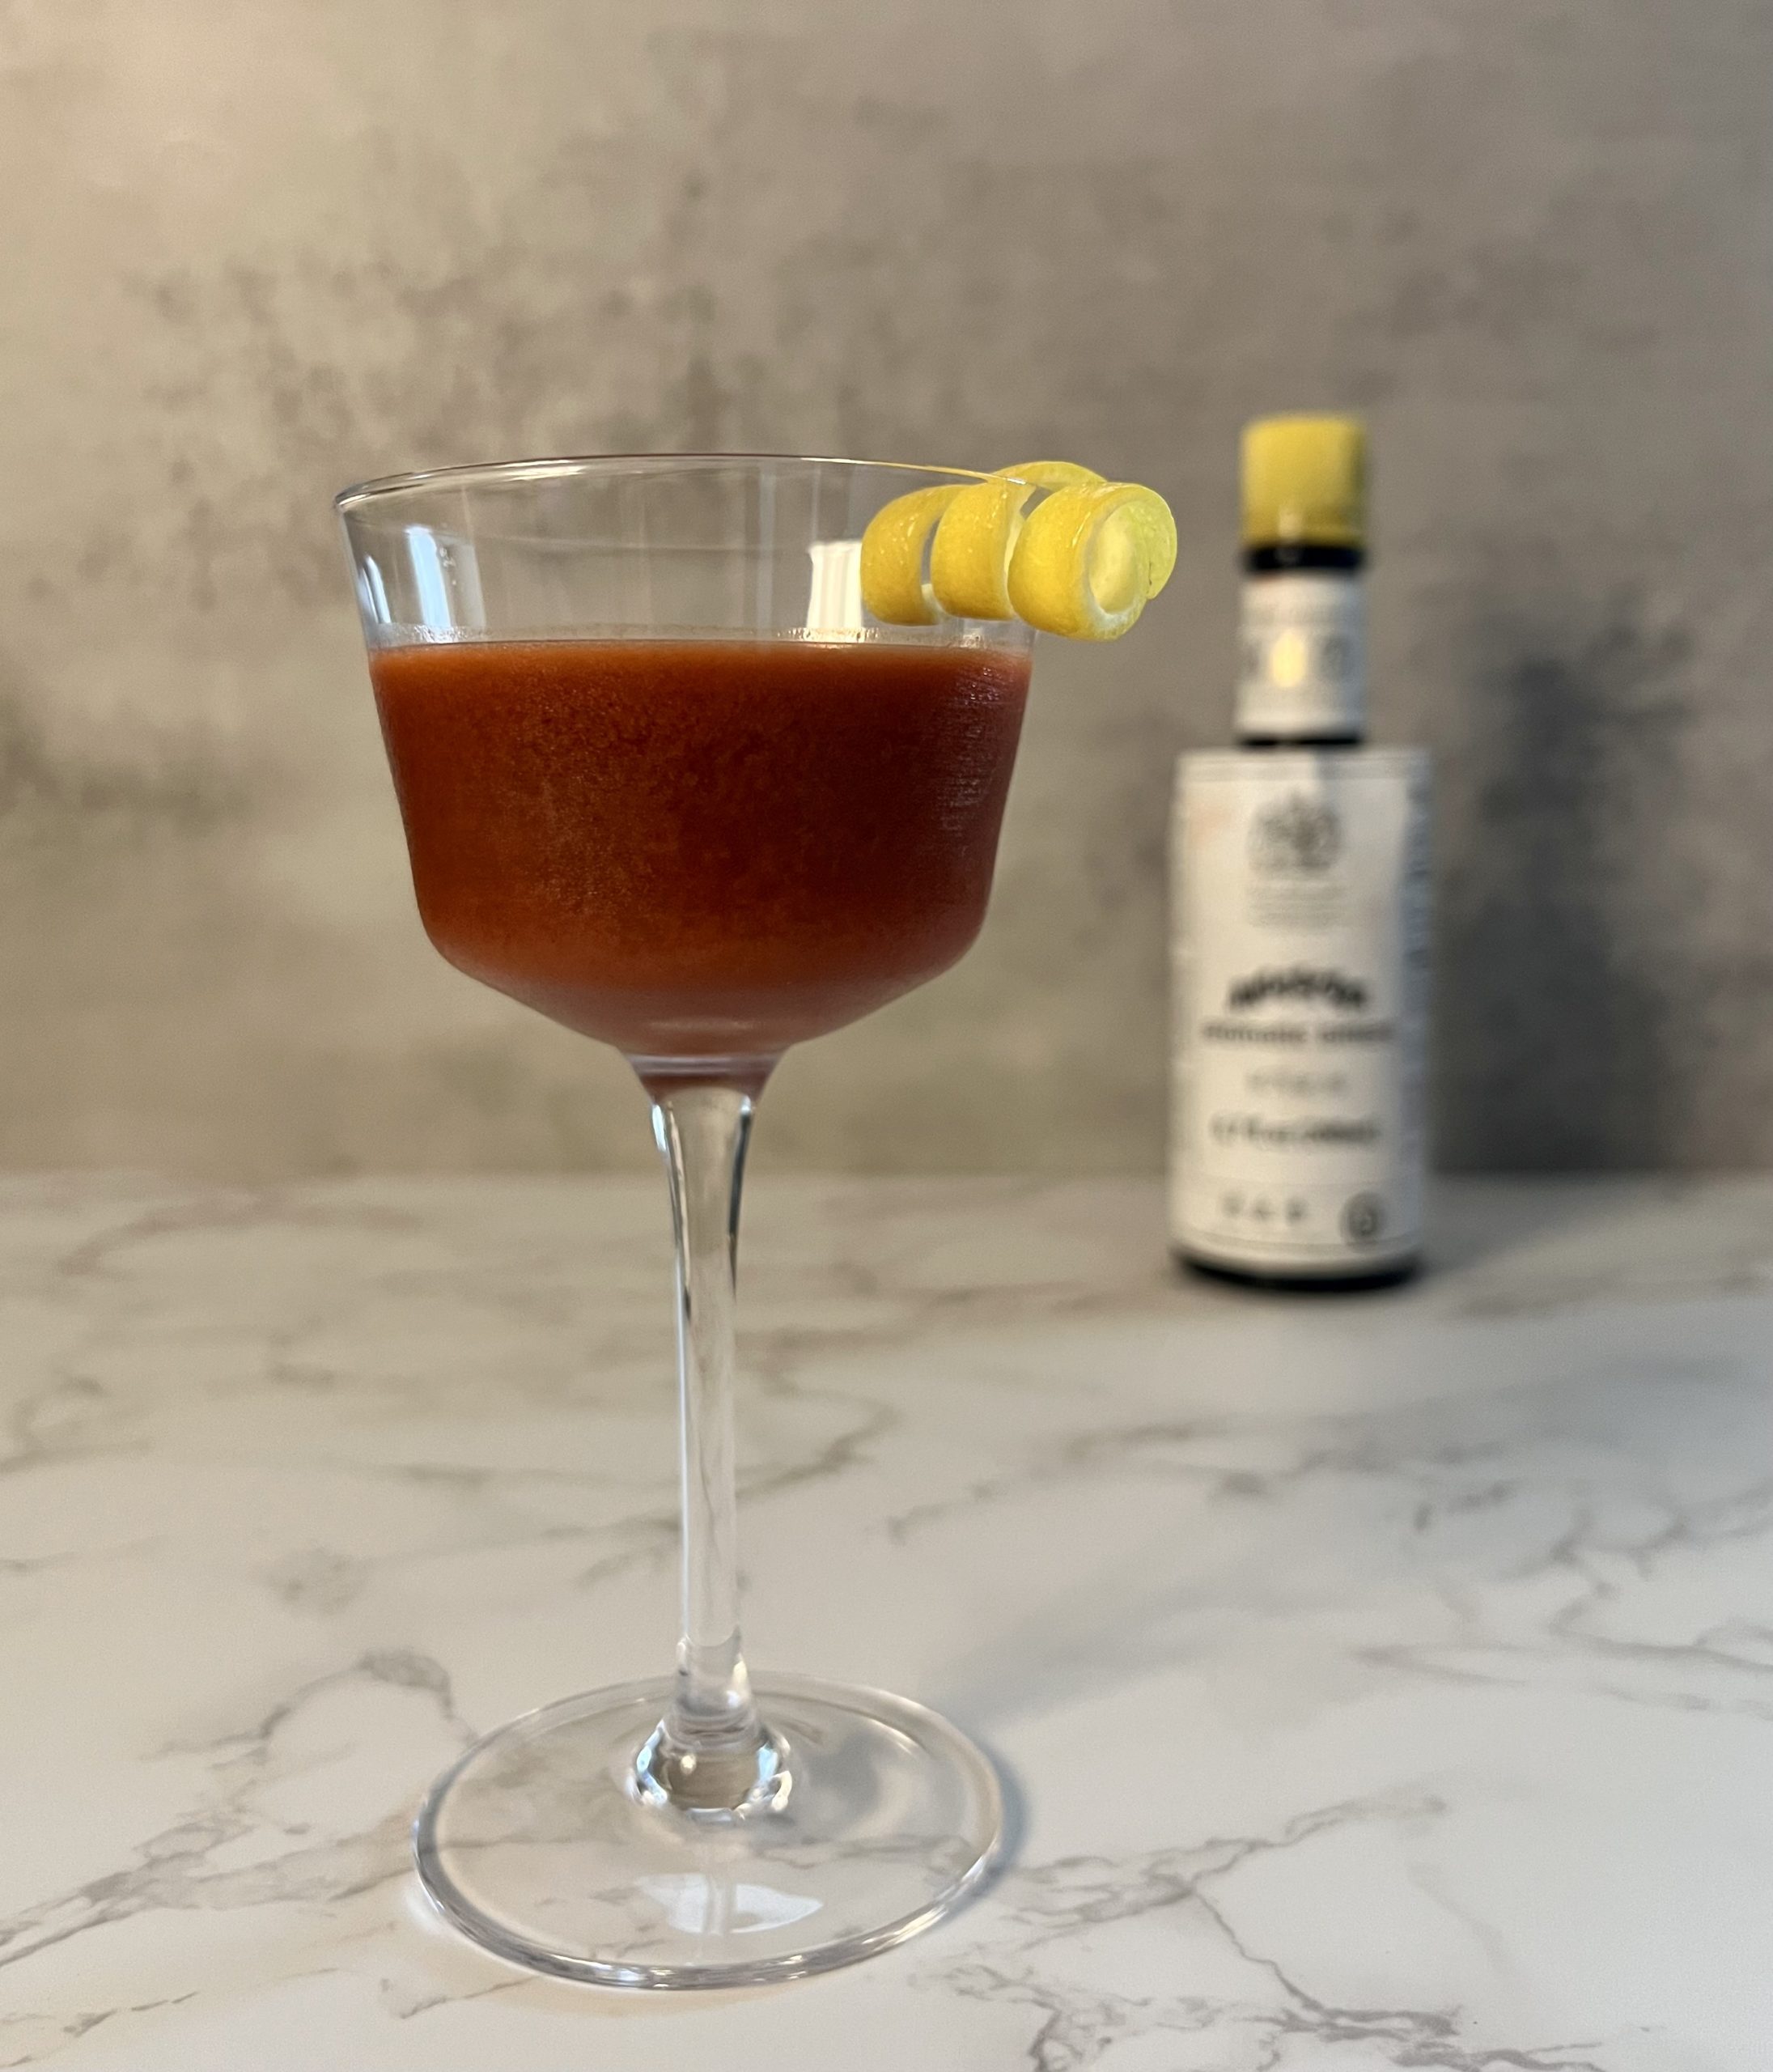 A Trinidad Sour garnished with a lemon twist in the foreground with a bottle of Angostura bitters behind it blurred in the background.